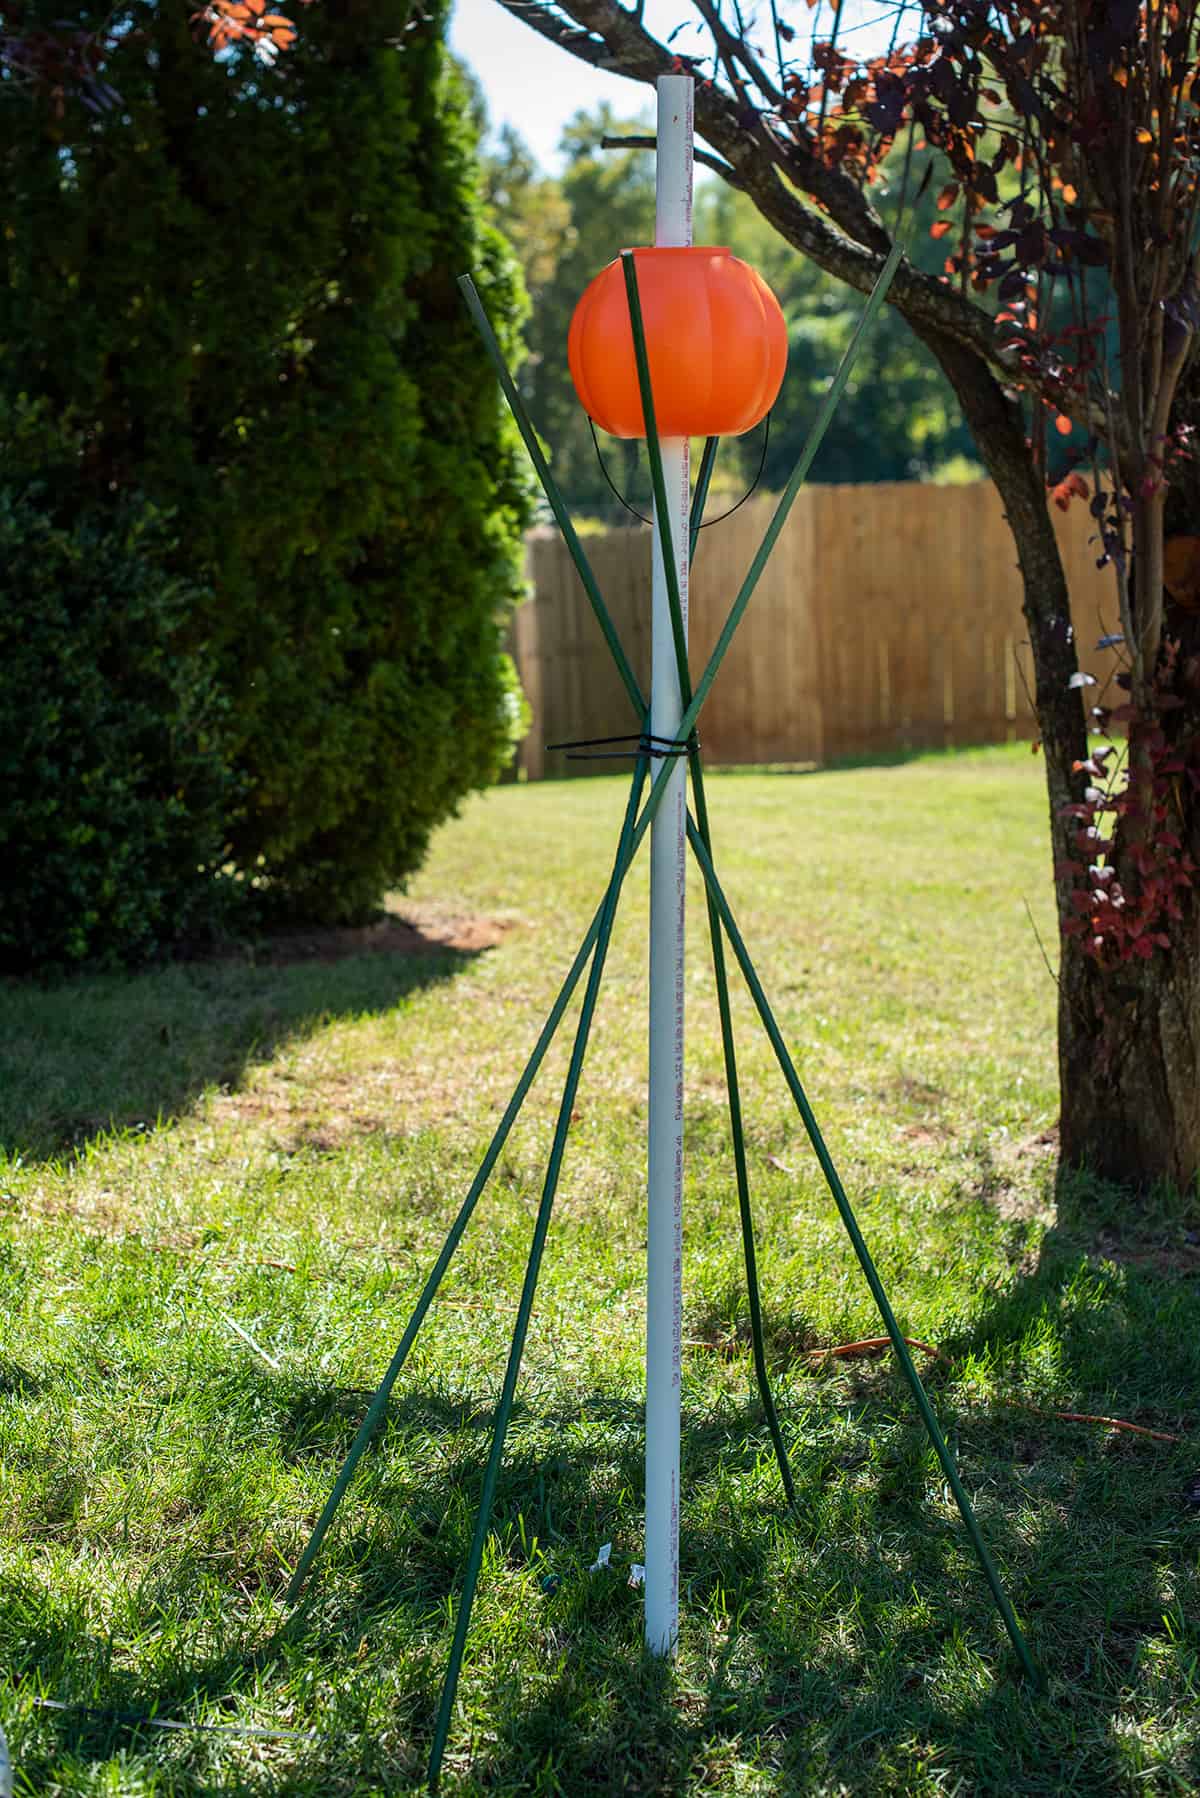 Tomato cage stakes wrapped around a pvc pipe to create the body of a witch halloween decoration.